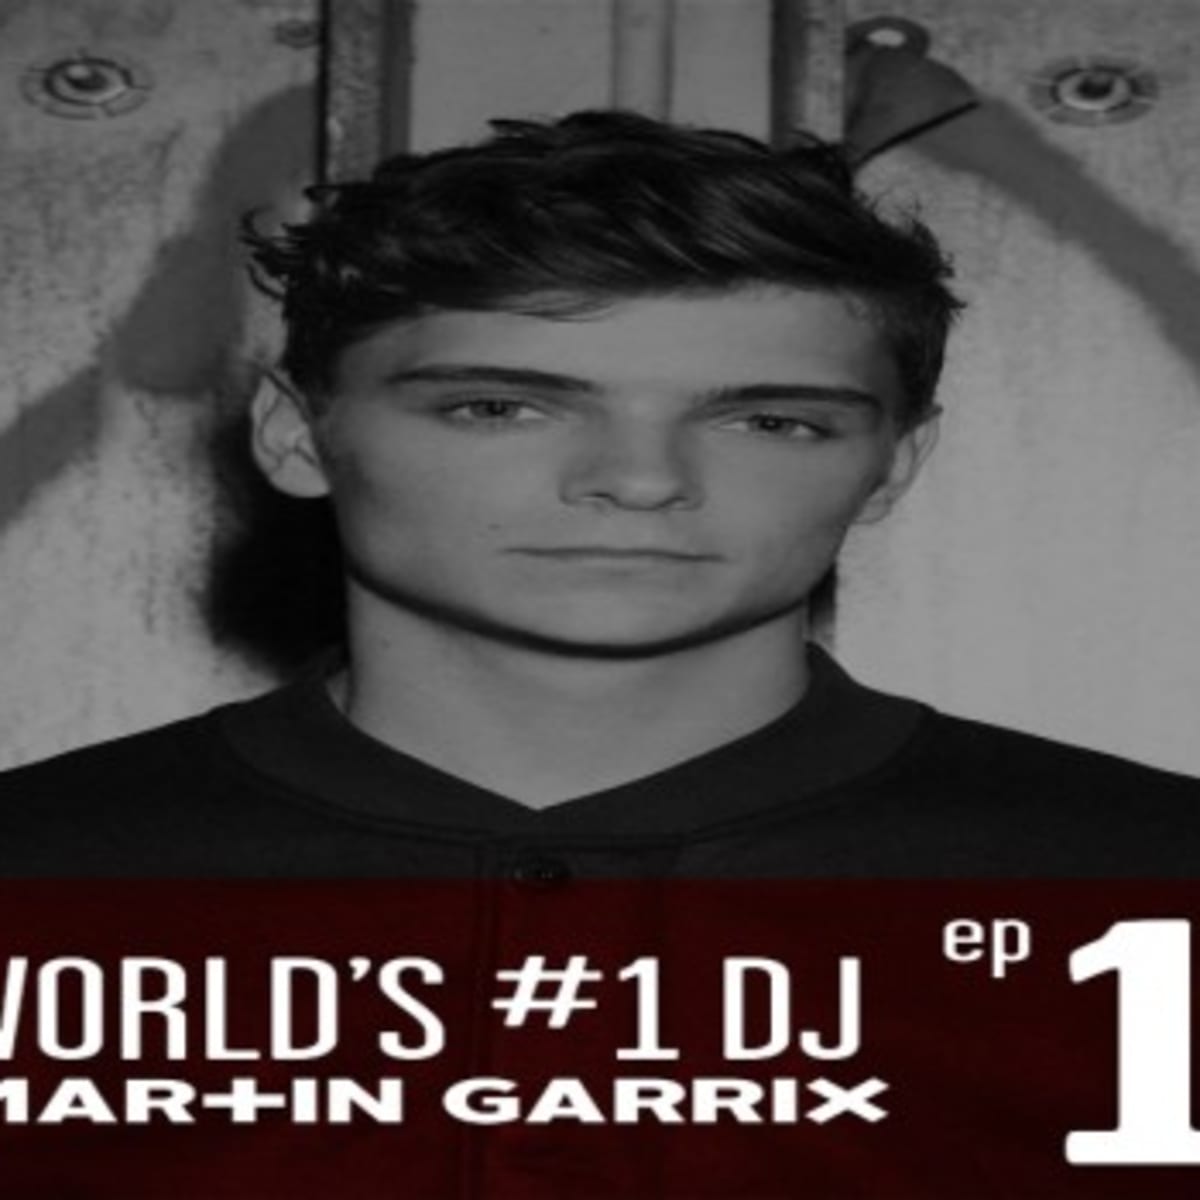 MARTIN GARRIX GEARS UP FOR ADE WITH A SPECIAL SET ON BEATS 1'S ONE MIX  [LISTEN]  - The Latest Electronic Dance Music News, Reviews &  Artists